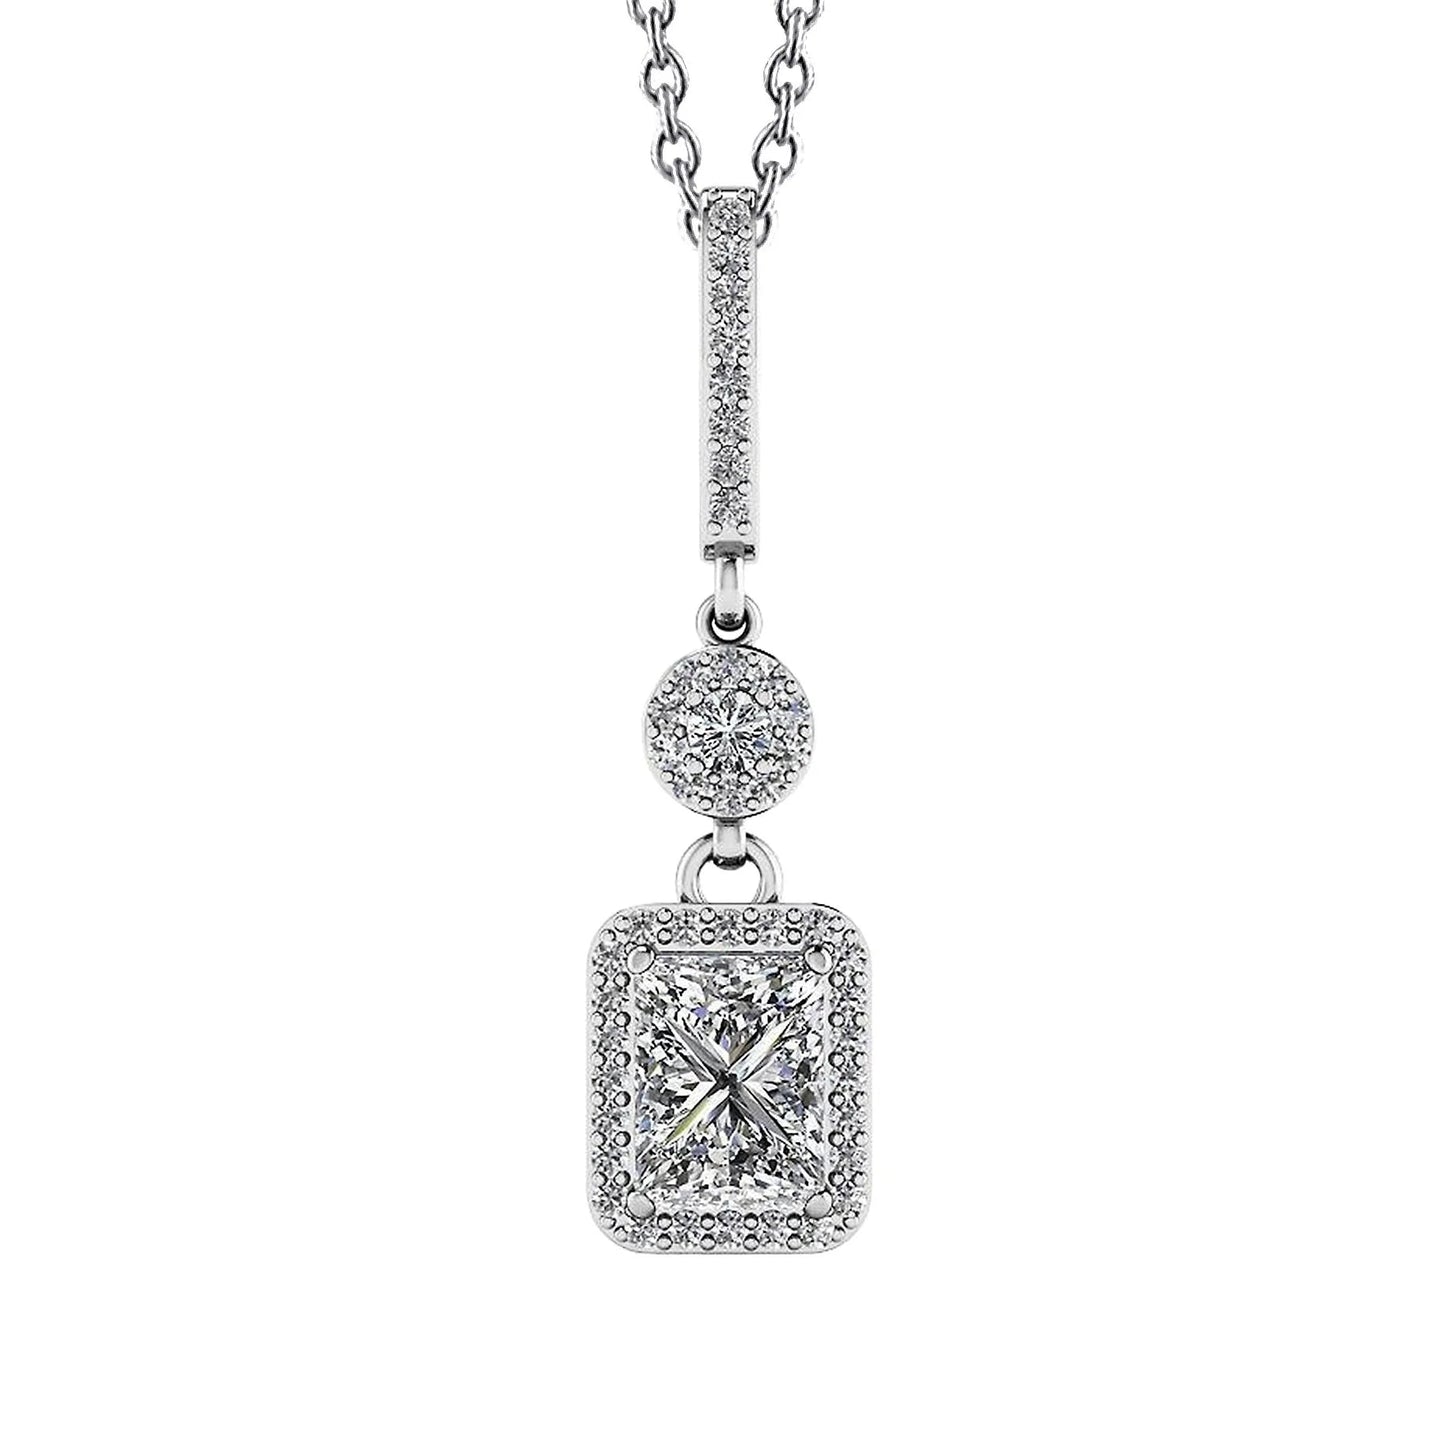 3.44 Ct Real Diamonds White Gold Love Spell Drop Pendant Necklace